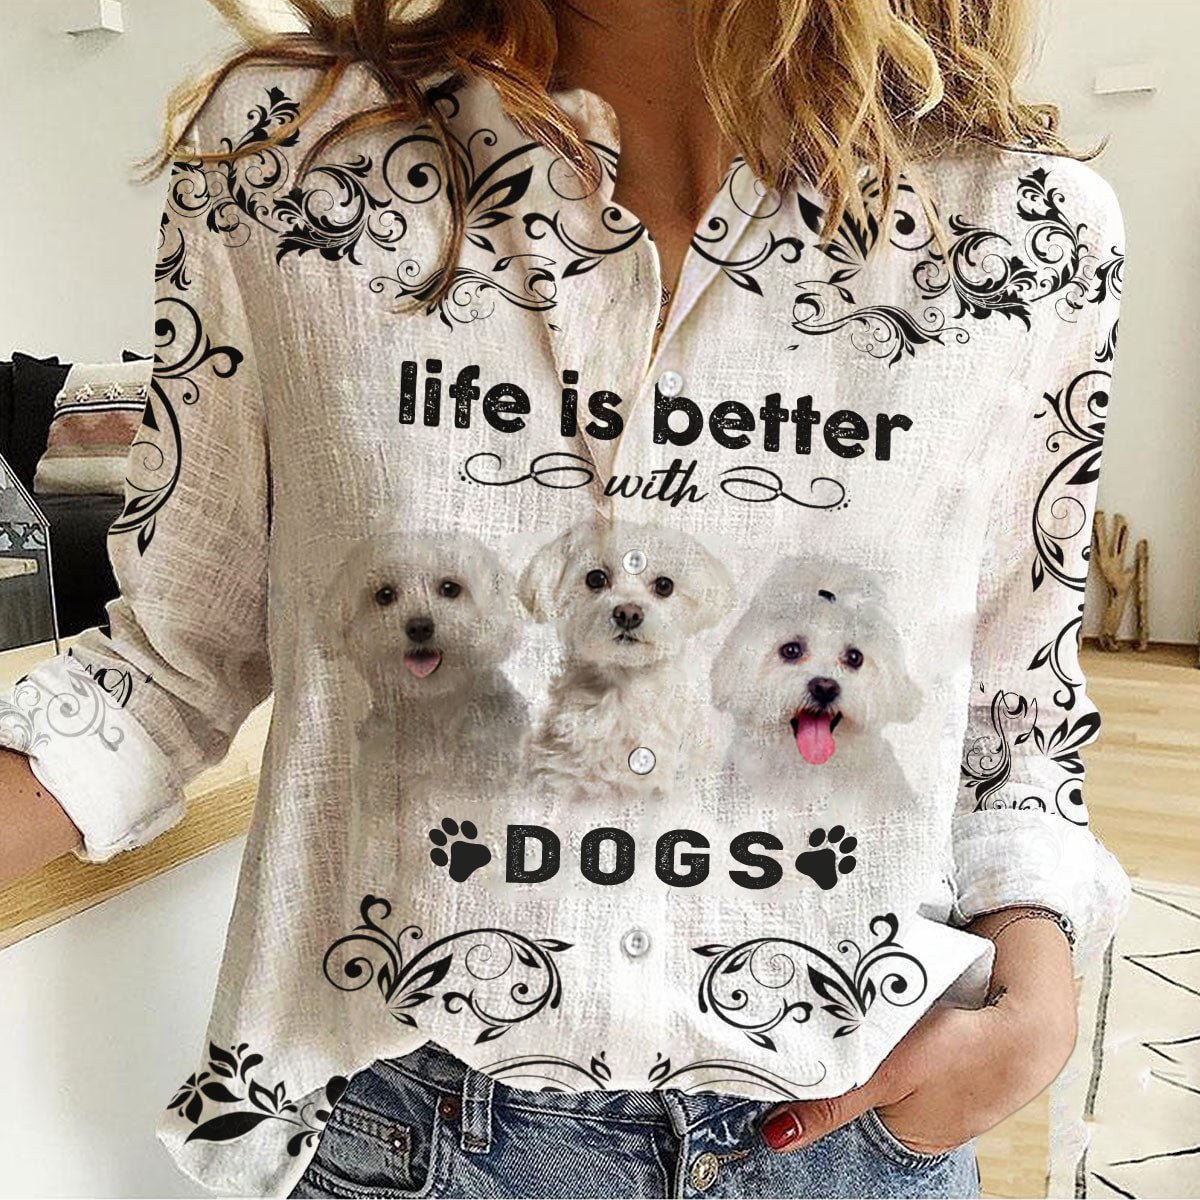 Maltese -Life Is Better With Dogs Women's Long-Sleeve Shirt